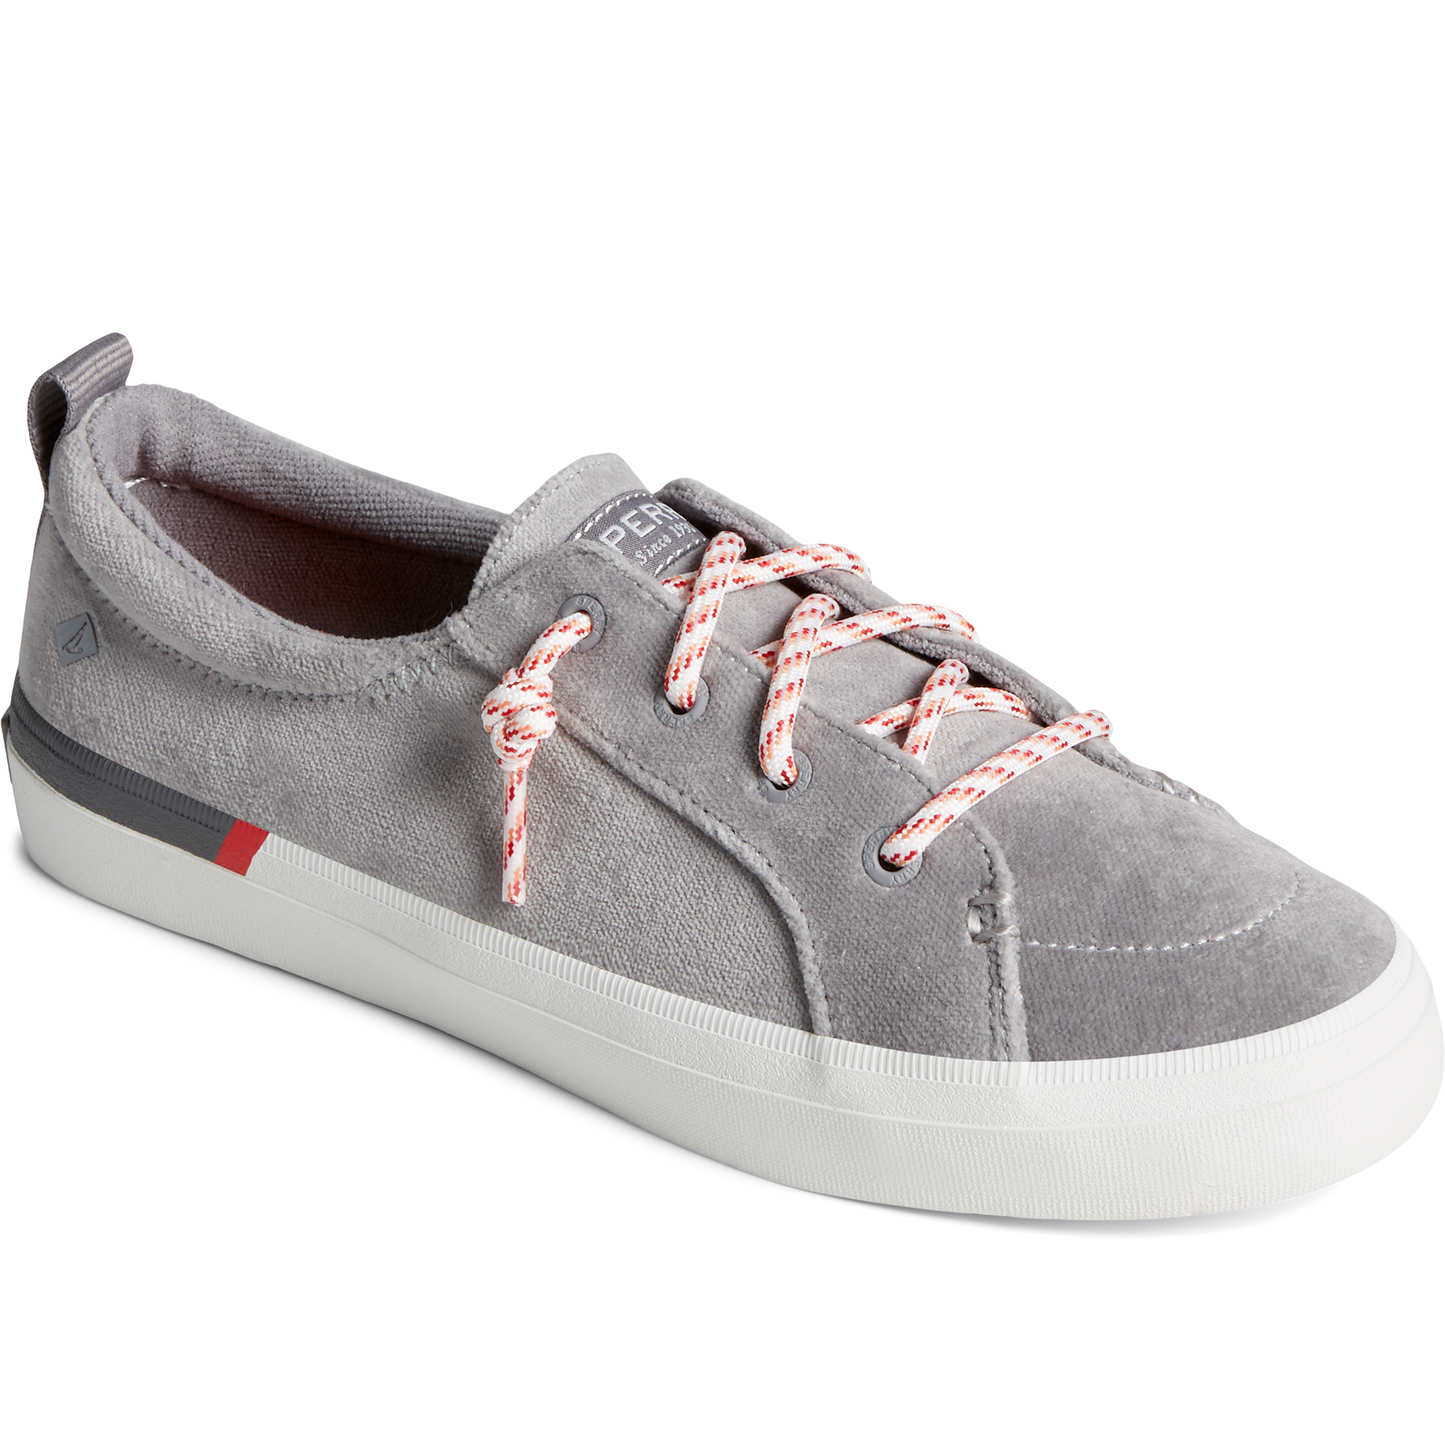 Sperry Women's Crest Vibe Brushed Cotton Sneaker - Grey (STS87857)